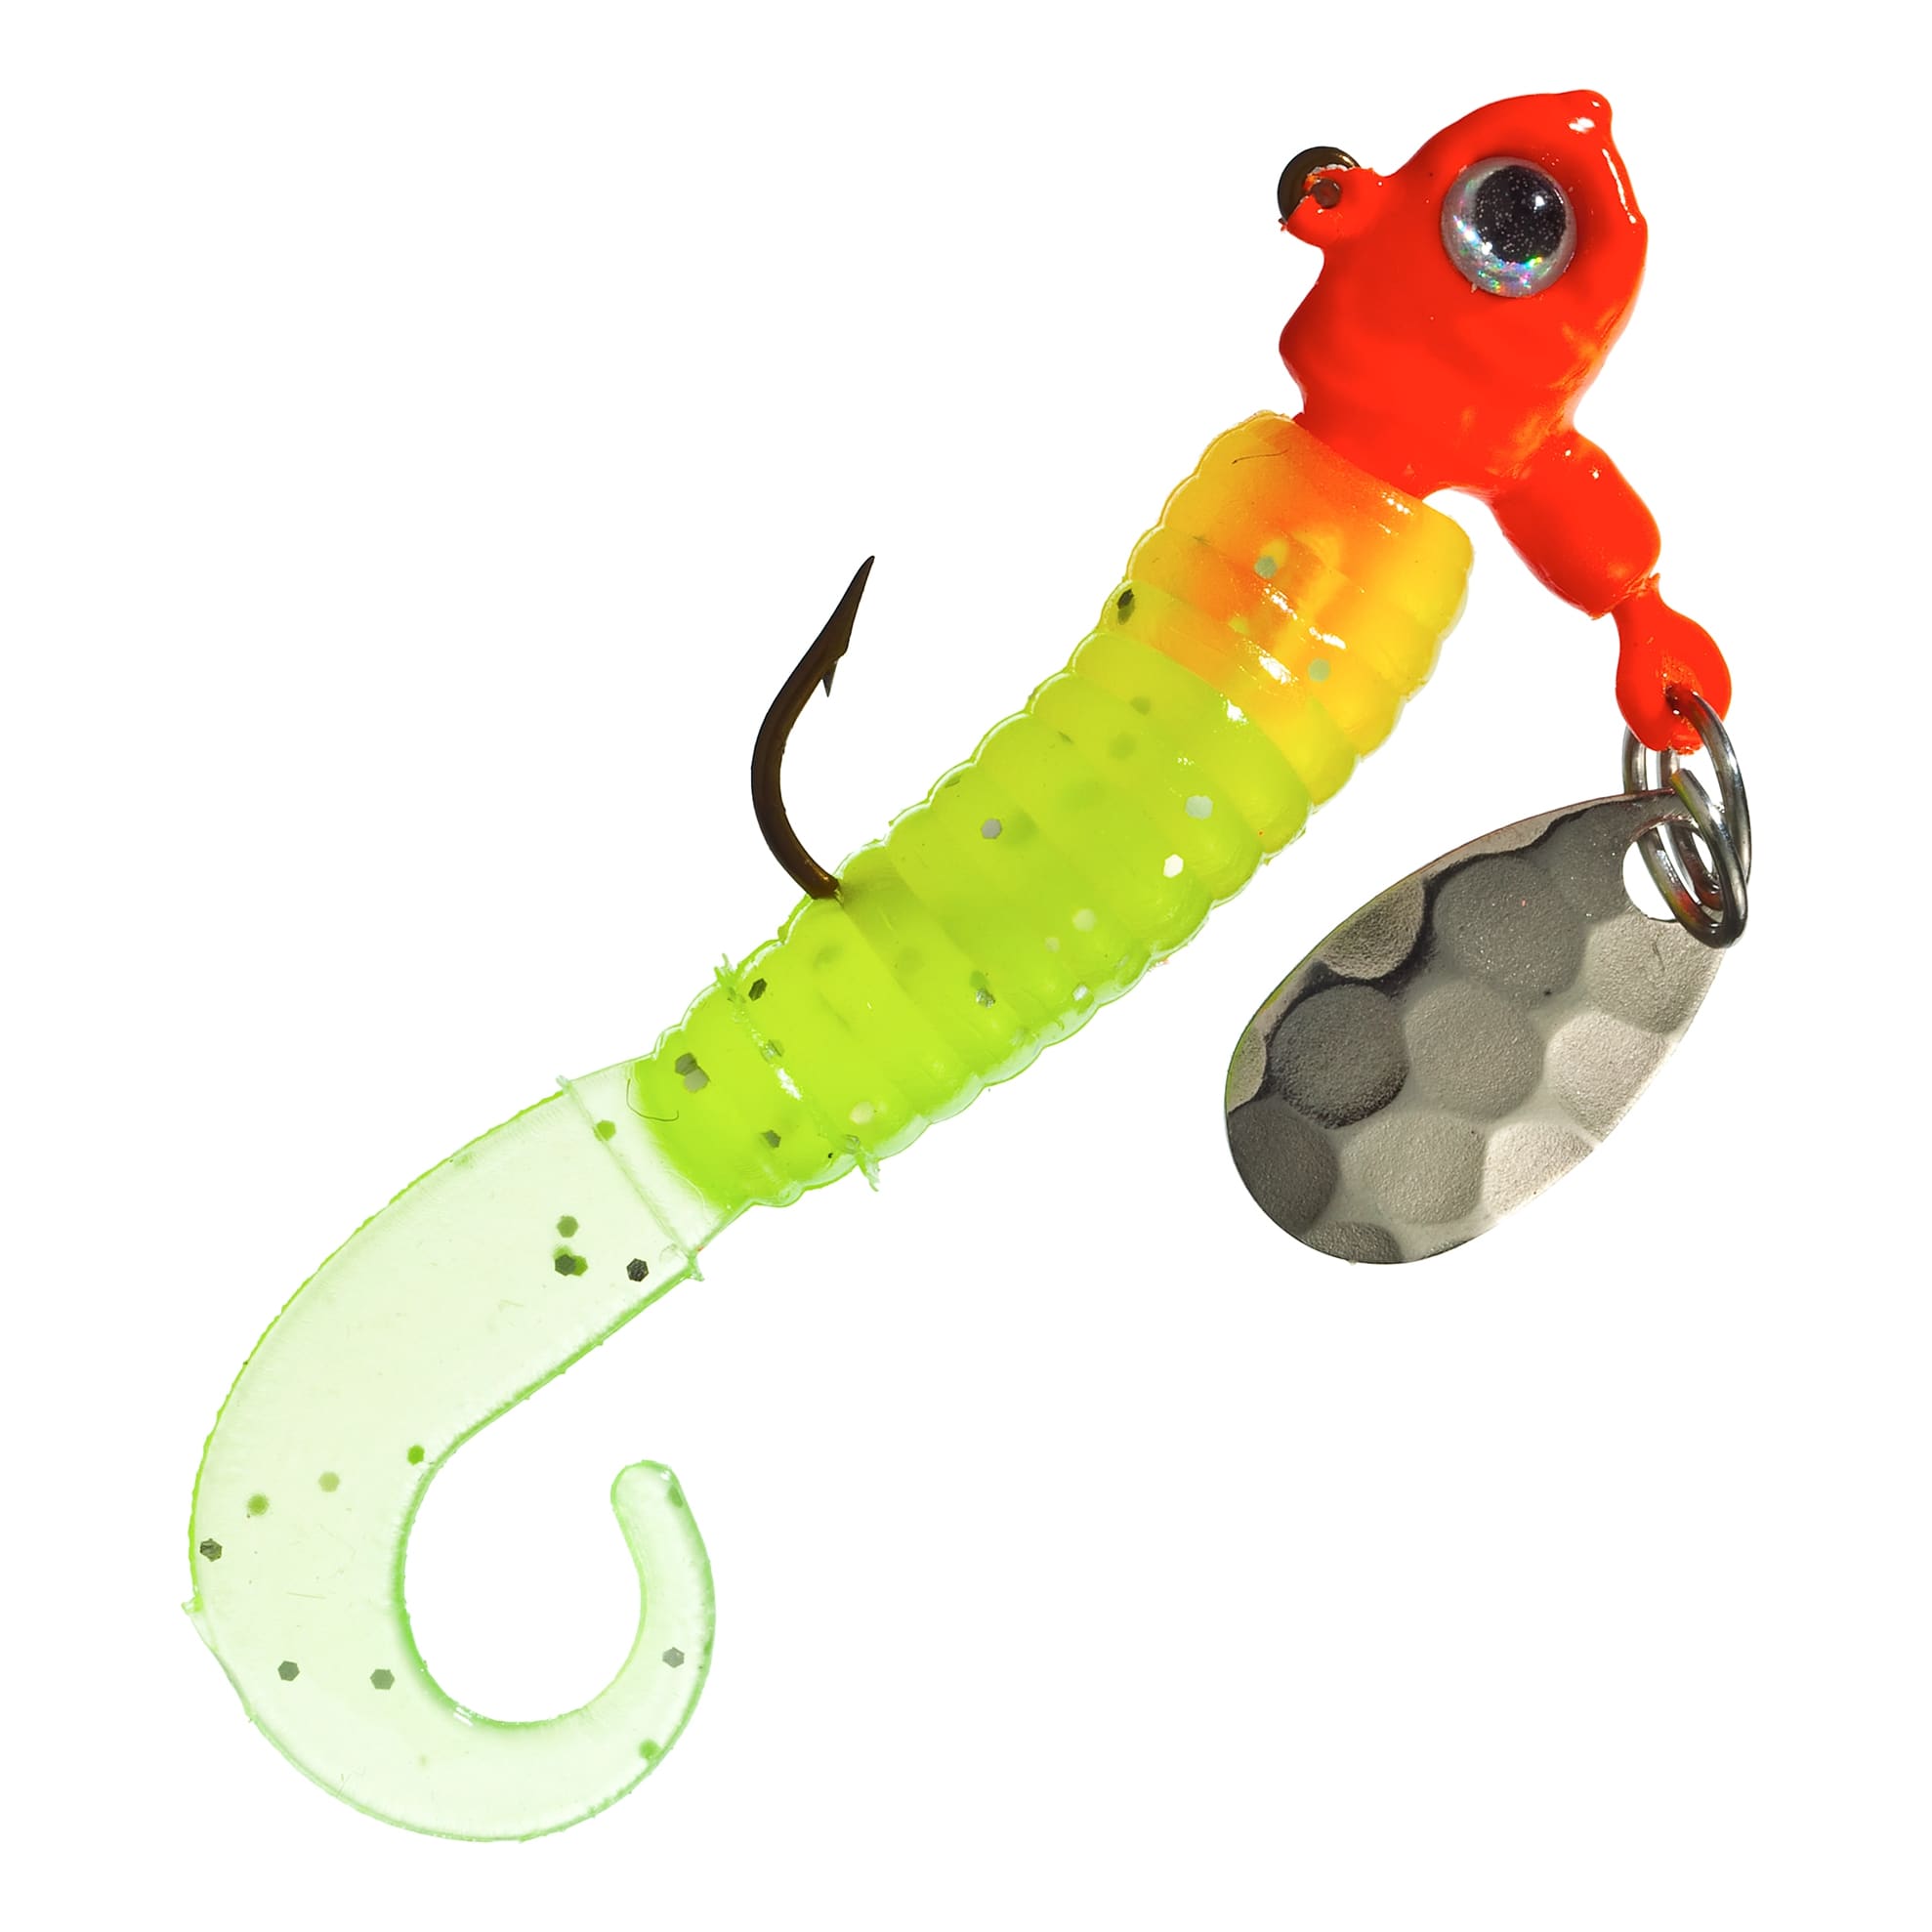 Bass Pro Shops® Curltail Stump Jumpers® Jig Baits - Fluorescent Red Chartreuse